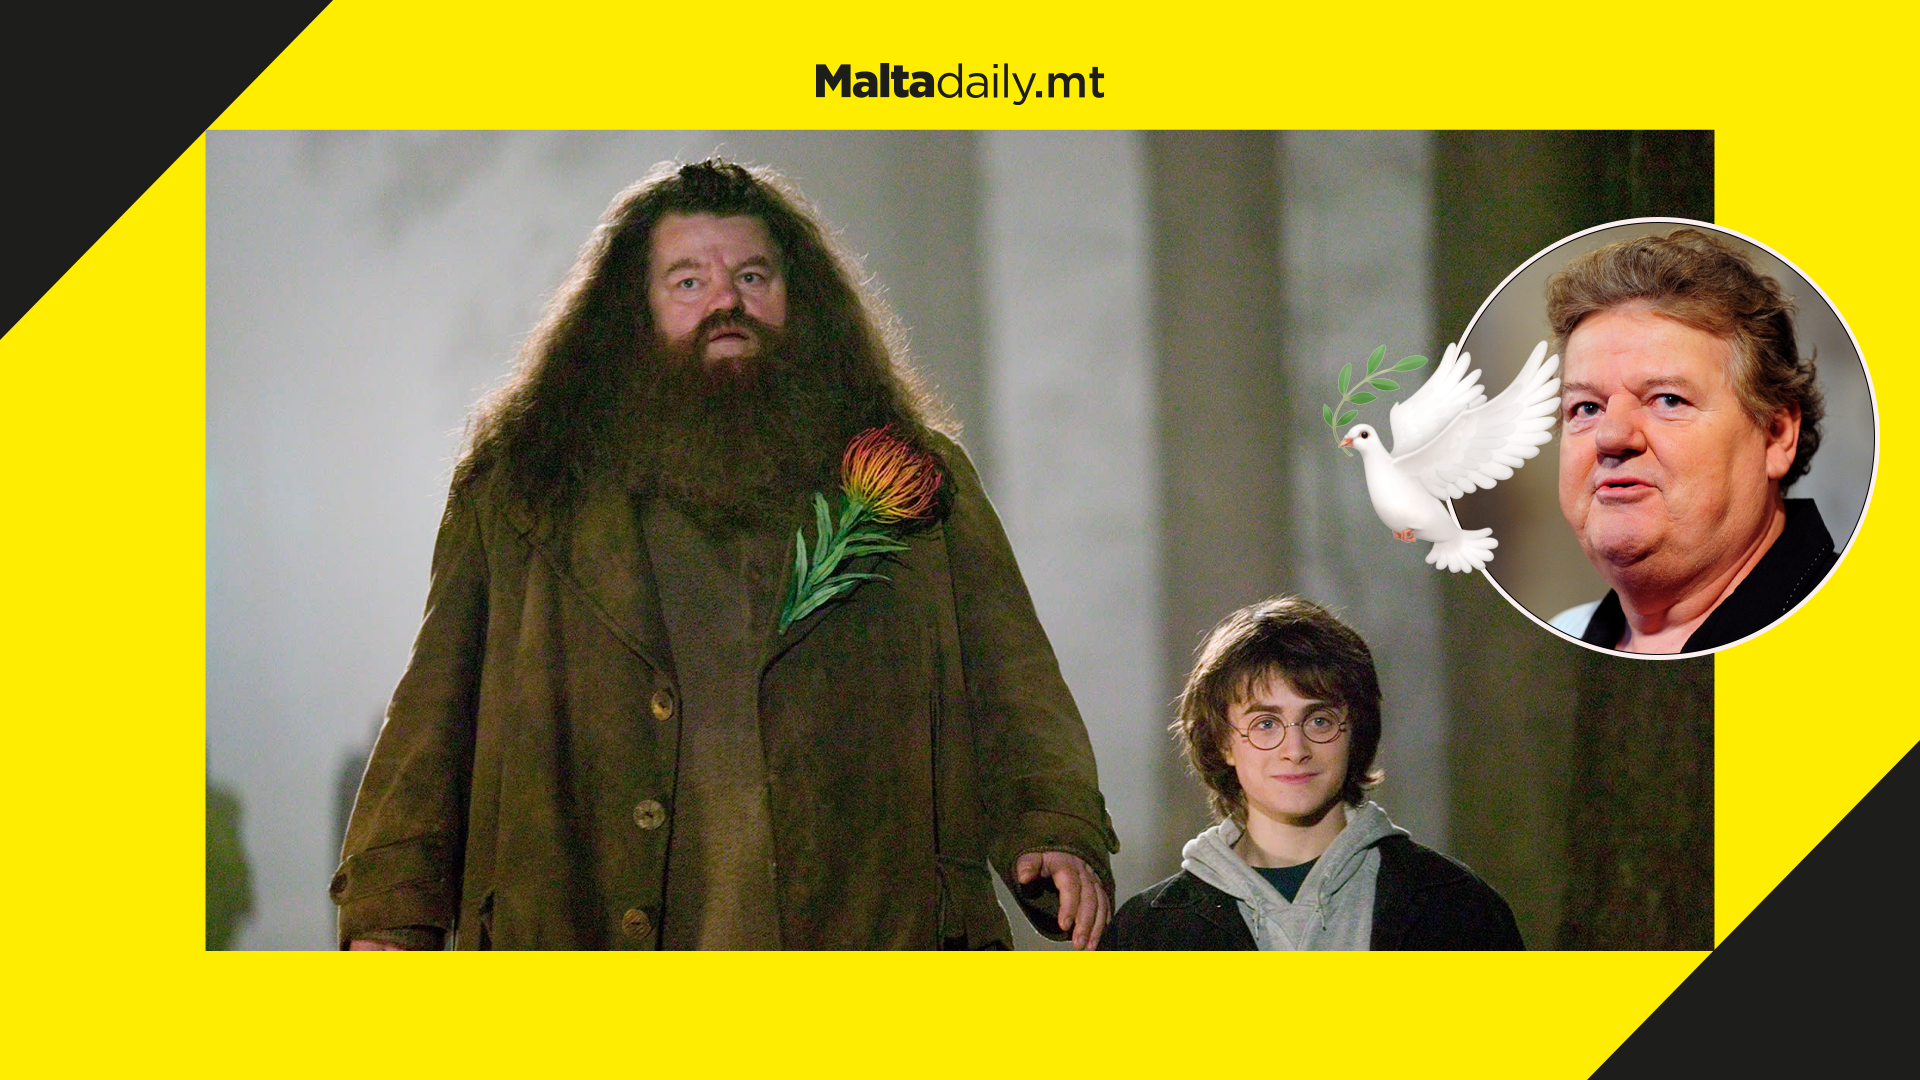 Rest in Peace Hagrid: Actor Robbie Coltrane passes away